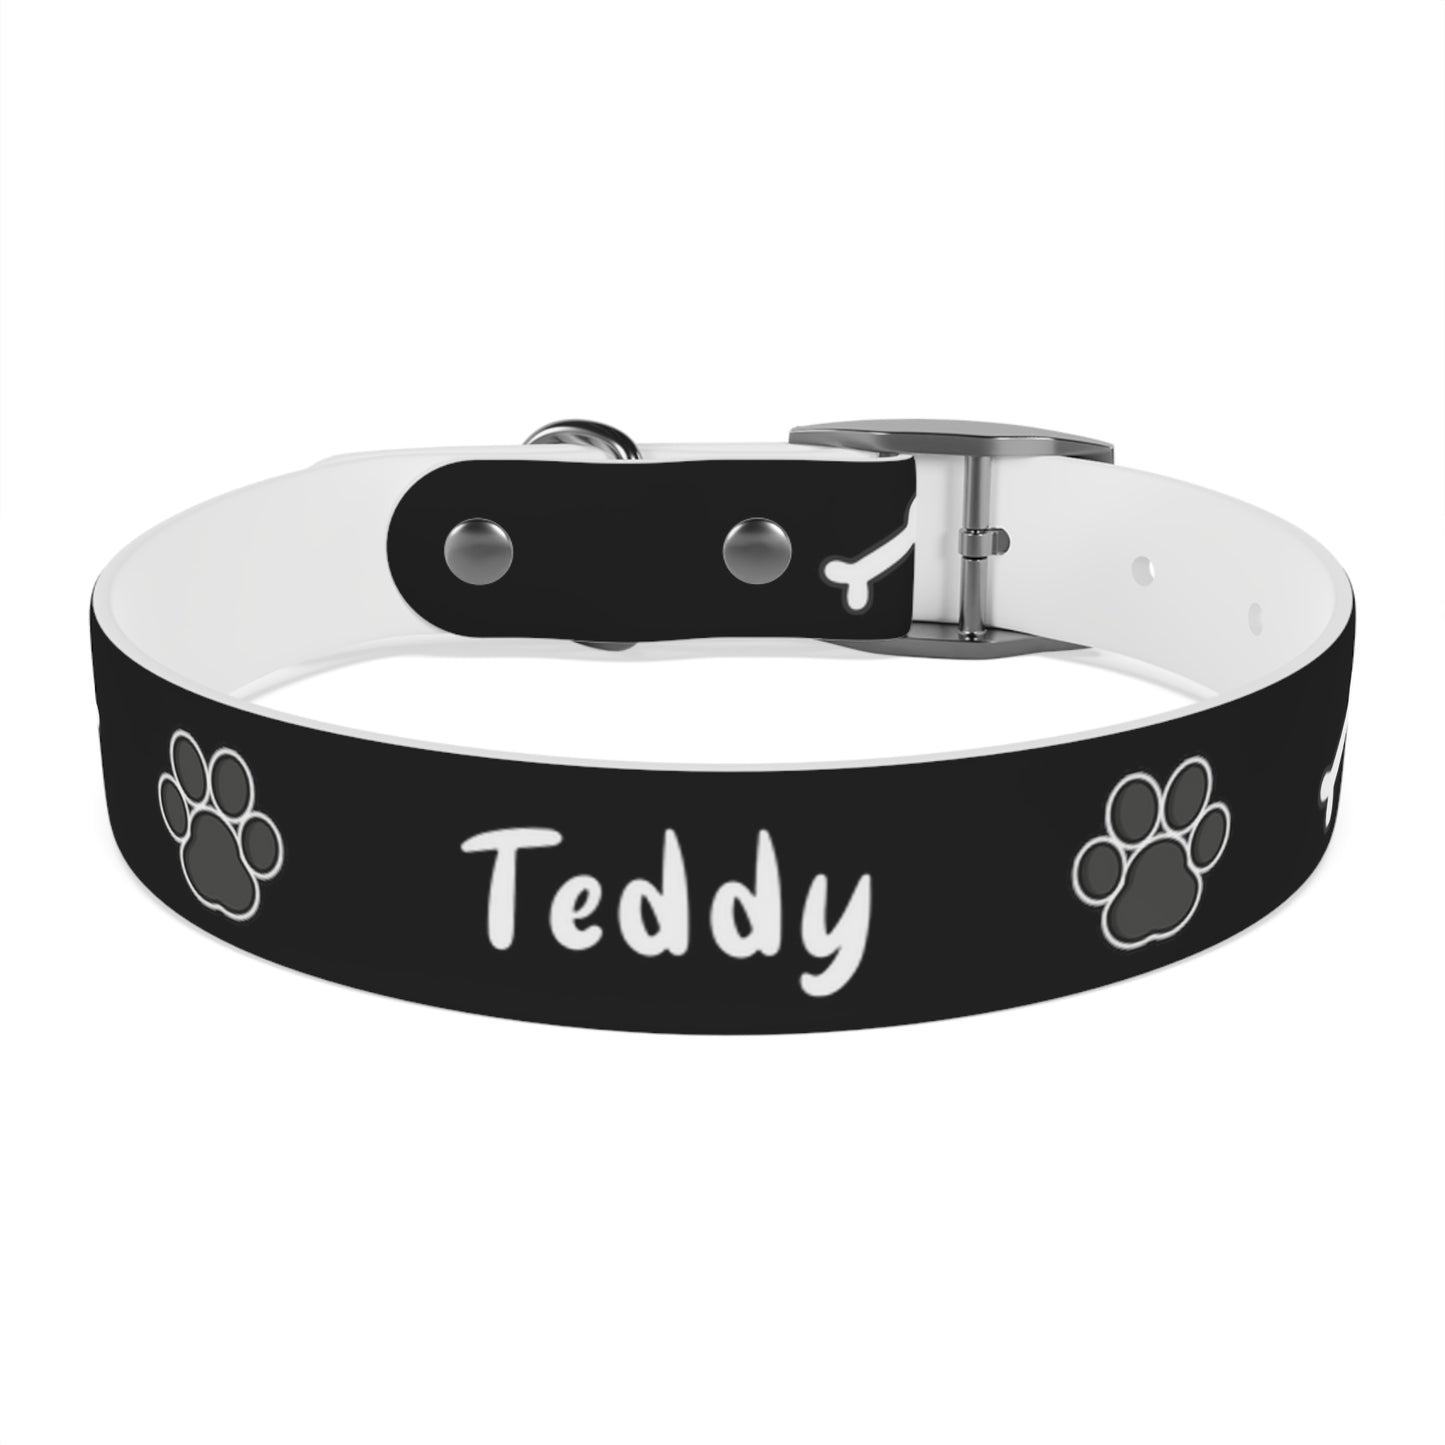 a dog collar with dog bones and paws design. The name of the dog is in the middle of the pet collar.  The dog collar color is black